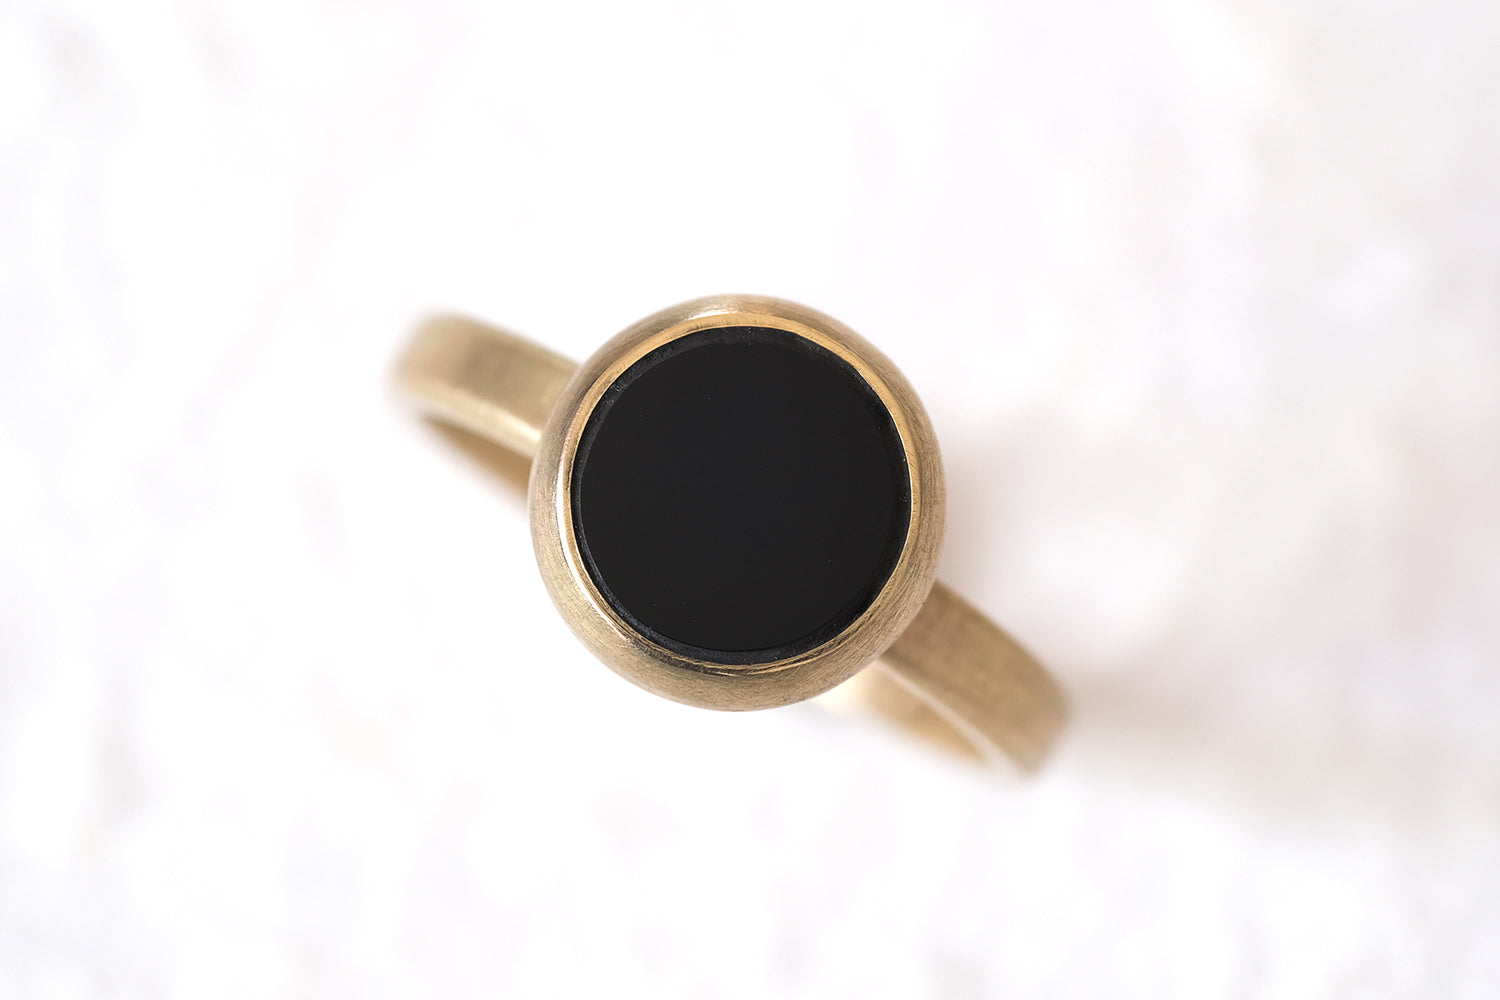 Gold Ring Set With An Onyx